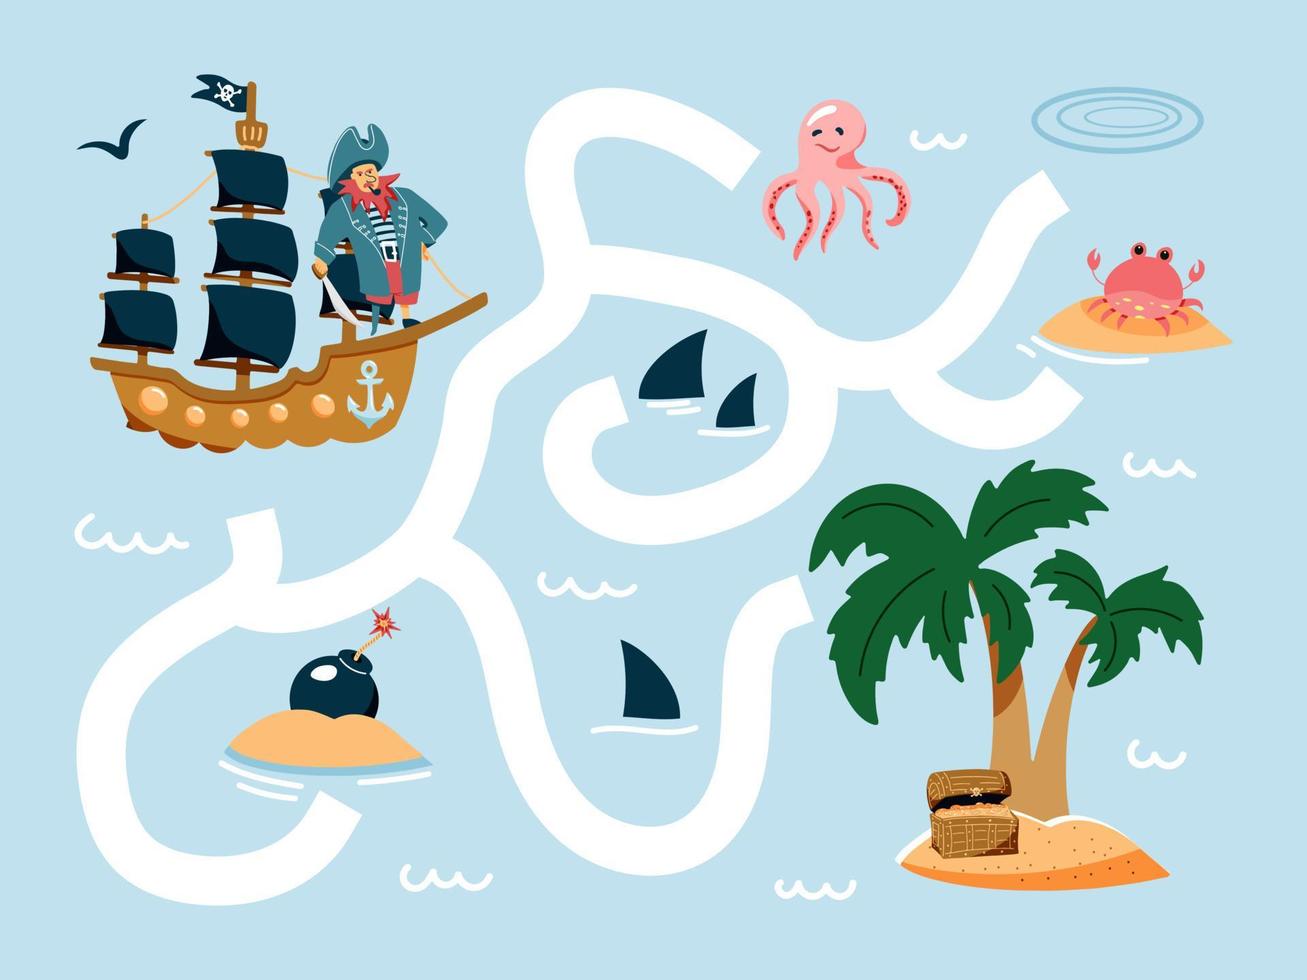 Help the pirate ship find the way to the island. Cute cartoon pirate maze game. Labyrinth. Funny game for children education. Vector illustration